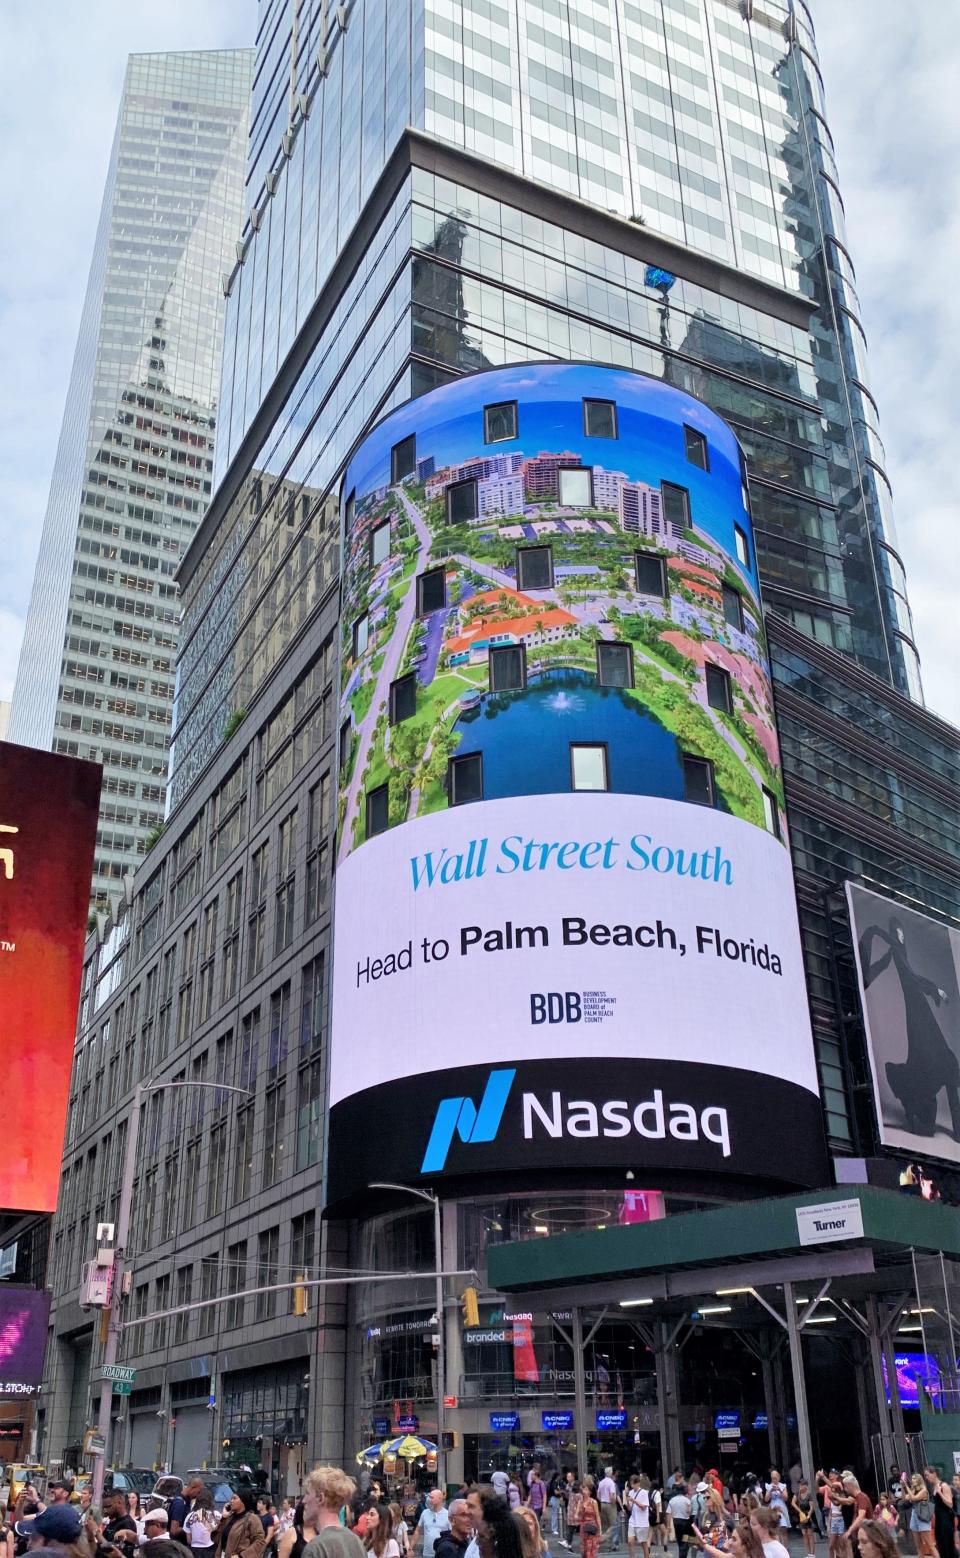 Palm Beach County's Business Development Board placed three digital billboards at 43rd Rotunda, Times Square Tower, and the iconic I Love NY Board. The billboards advertised "Wall Street South", a nickname given to West Palm Beach.